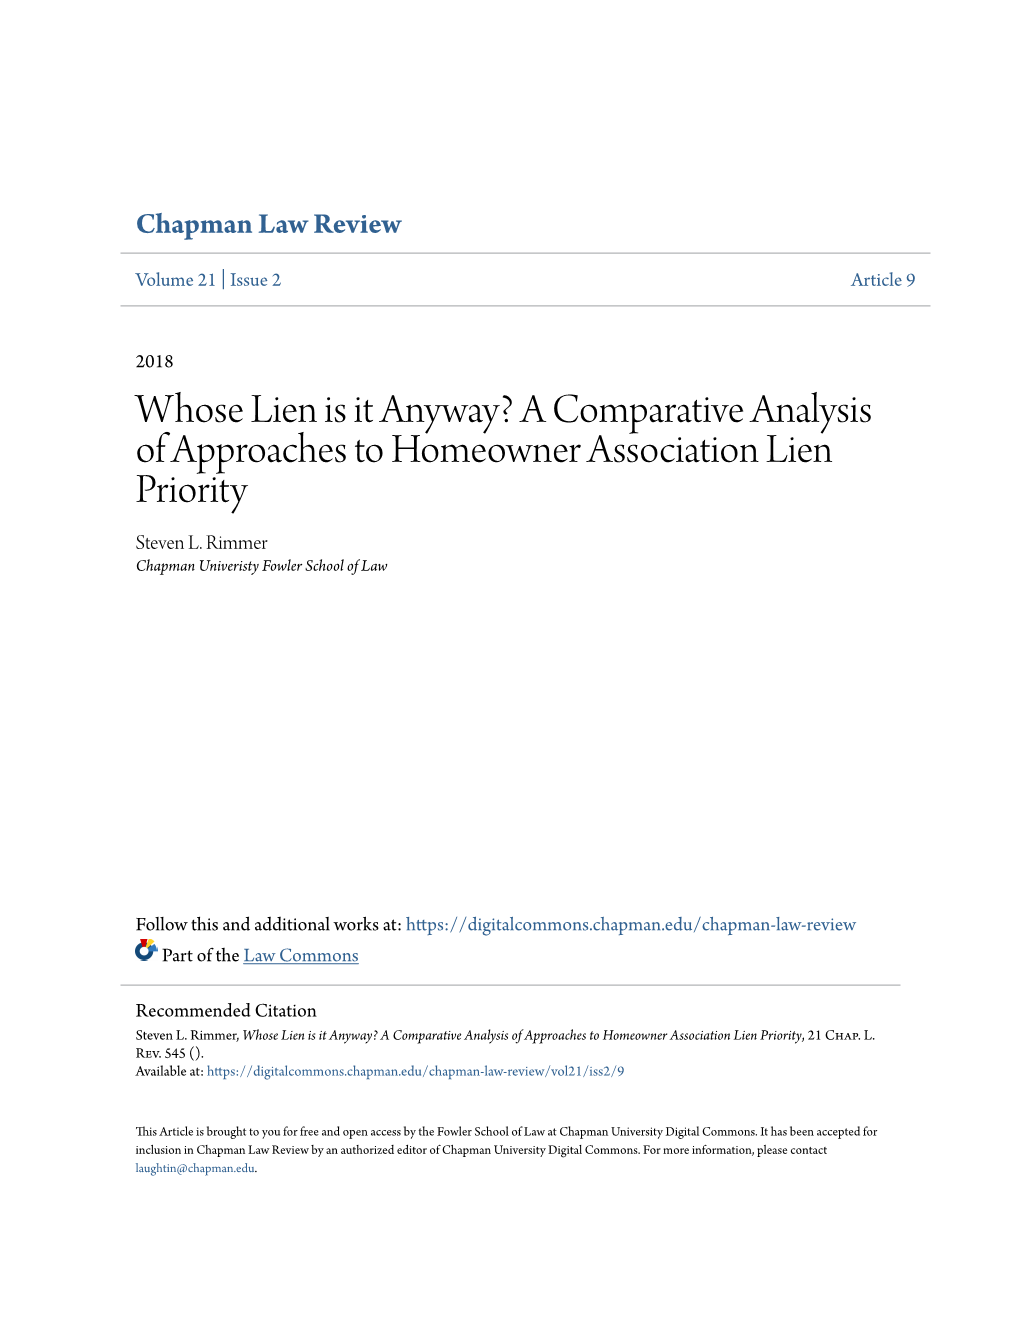 A Comparative Analysis of Approaches to Homeowner Association Lien Priority Steven L